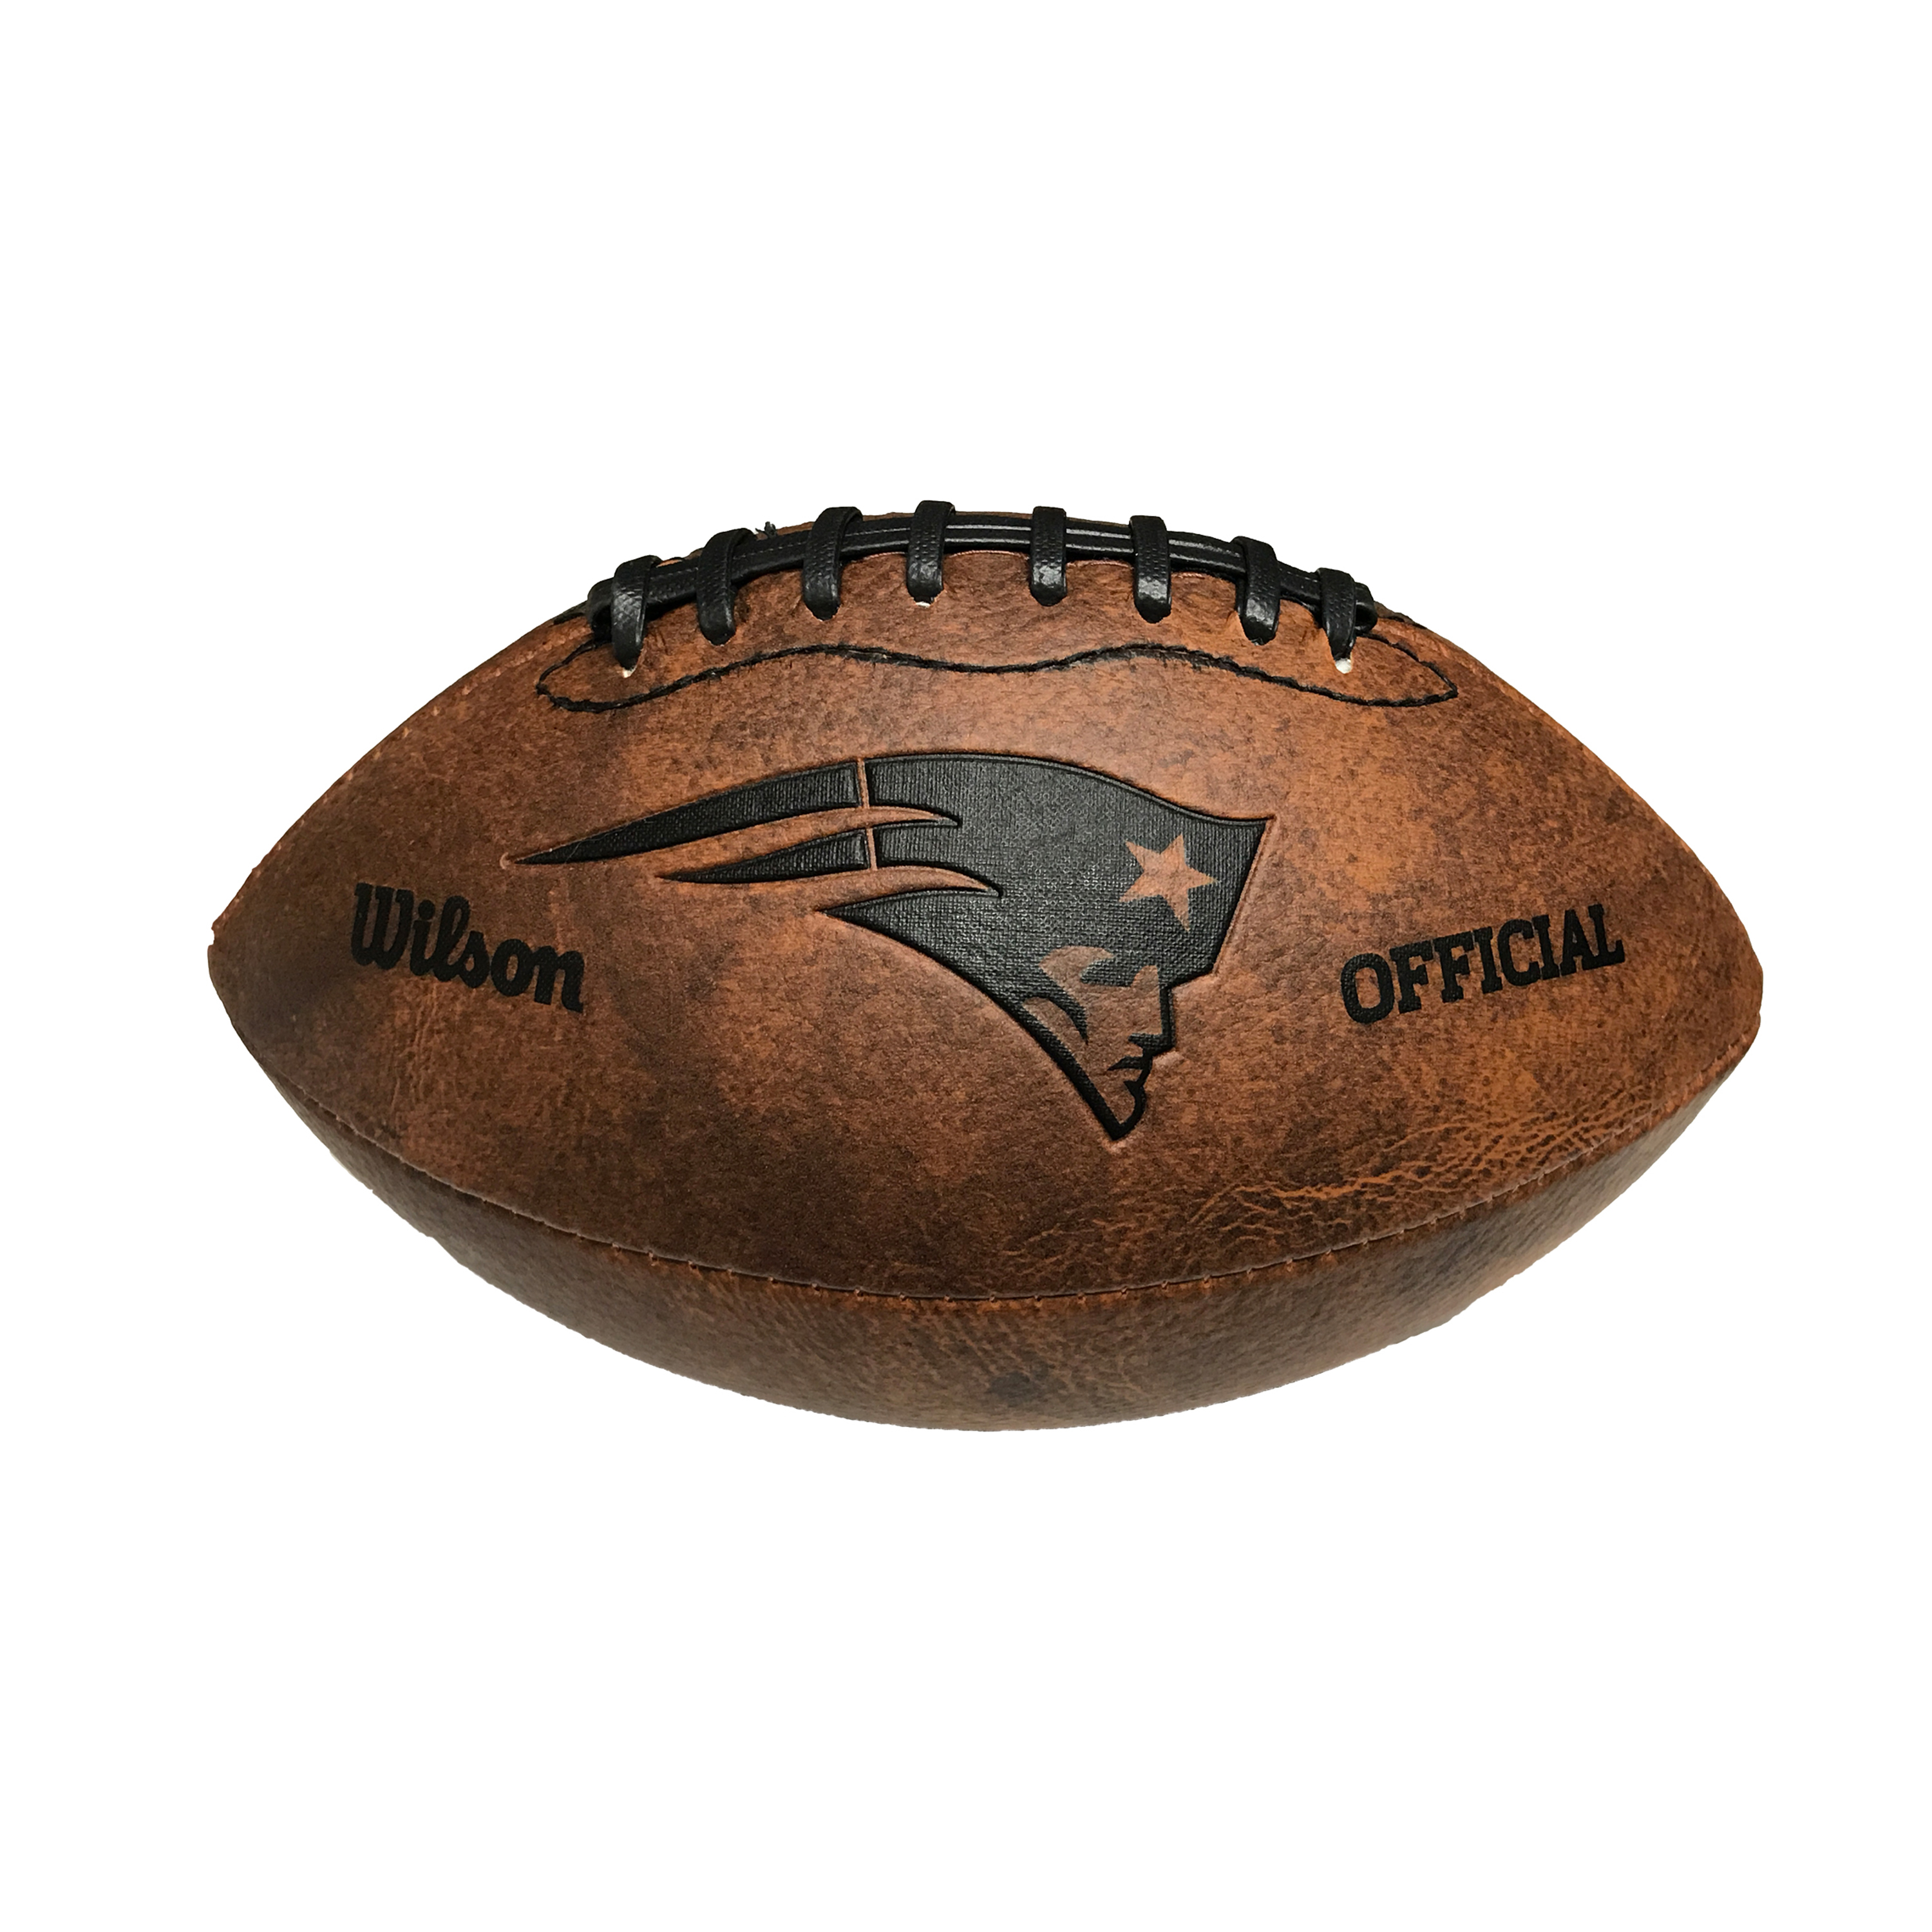 NFL - Wilson 9 Inch Throwback Football - New England Patriots - image 1 of 2